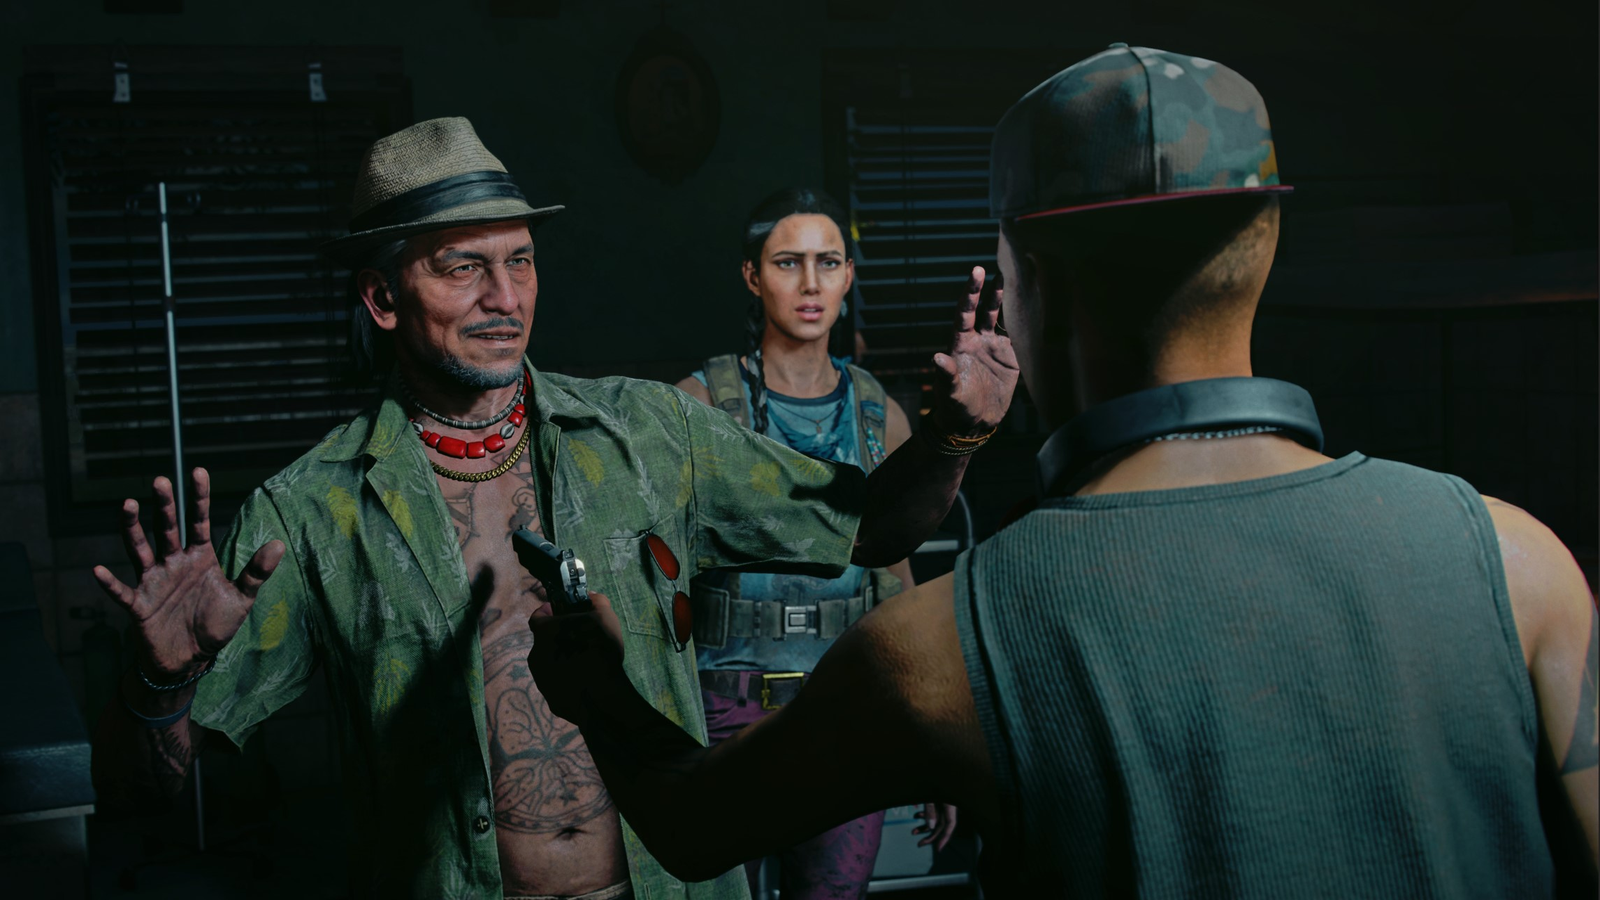 Far Cry 6 is getting a free weekend and a Stranger Things crossover mission